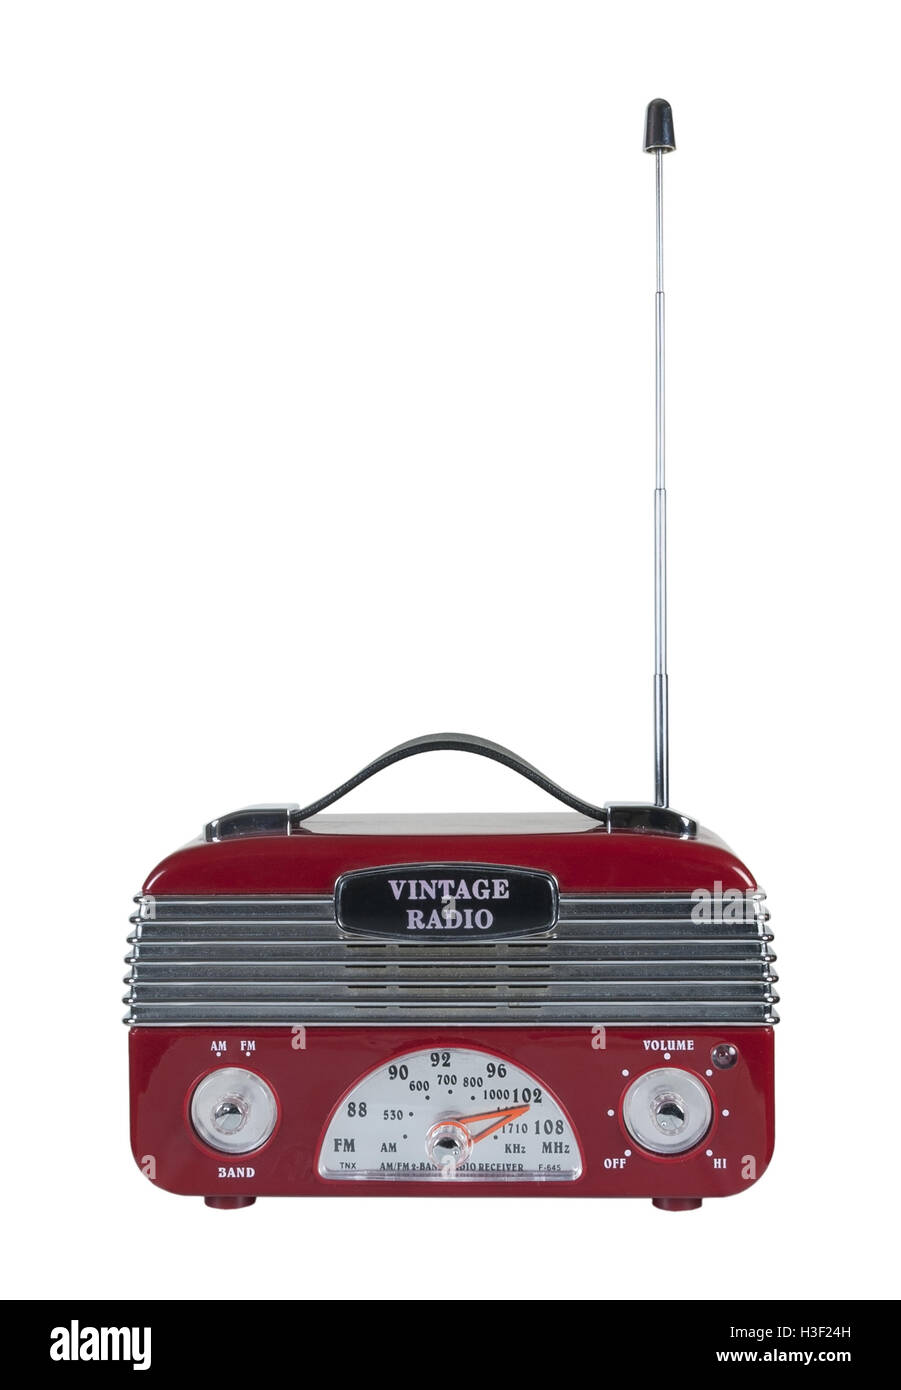 Red vintage radio with a retro tuner display on the front - path included Stock Photo